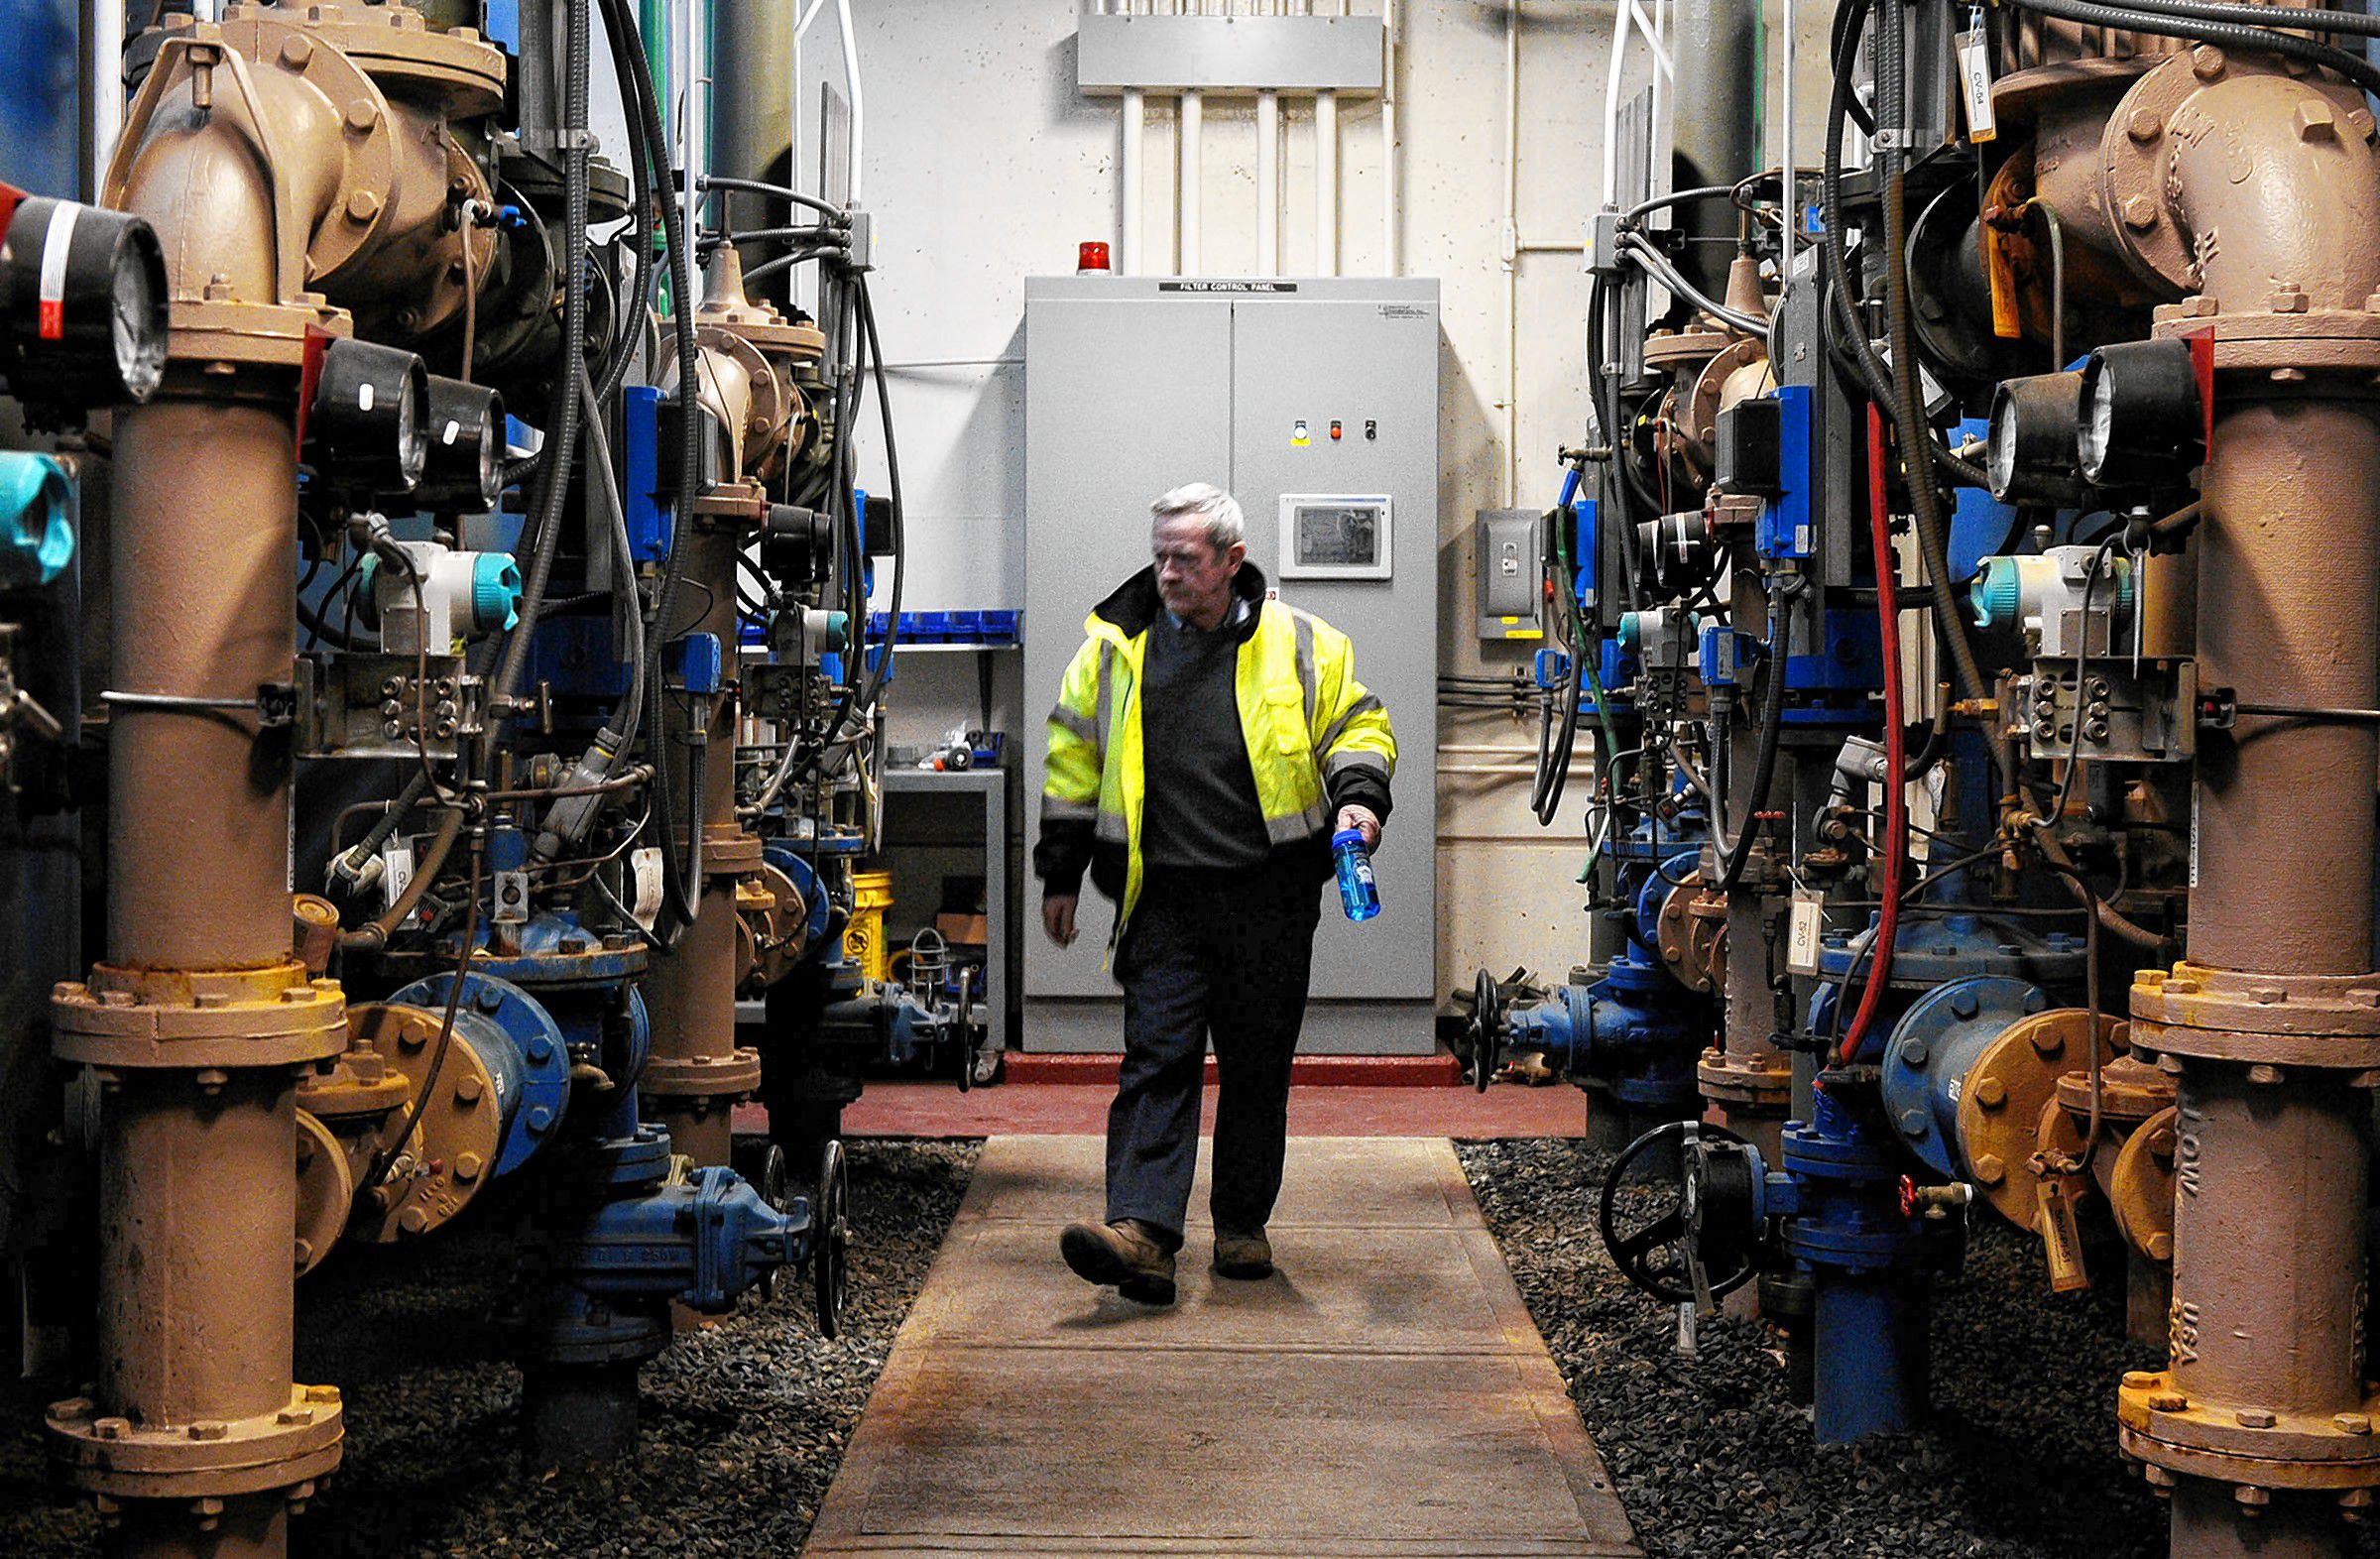 Rich Kenney, chief water systems operator for the Town of Hartford, Vt. leaves the Wilder, Vt., treatment plant to check on a reported leak in a White River Junction, Vt., water line Wednesday, January 22, 2014. (Valley News - James M. Patterson) Copyright Valley News. May not be reprinted or used online without permission. Send requests to permission@vnews.com.